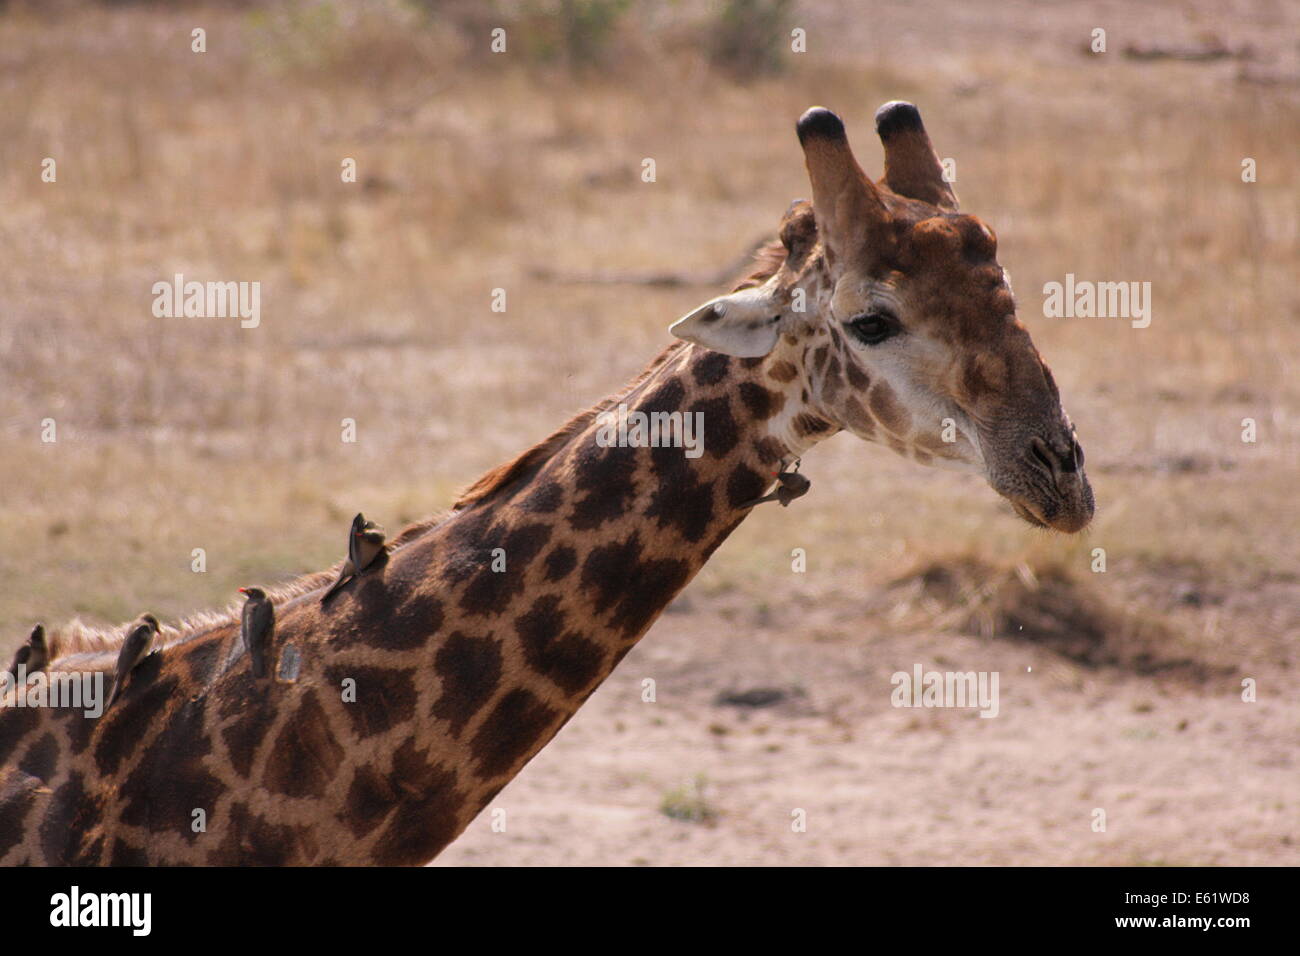 A number of birds dining on parasites on the neck of a Giraffe in the Kruger National Park, South Africa. Stock Photo